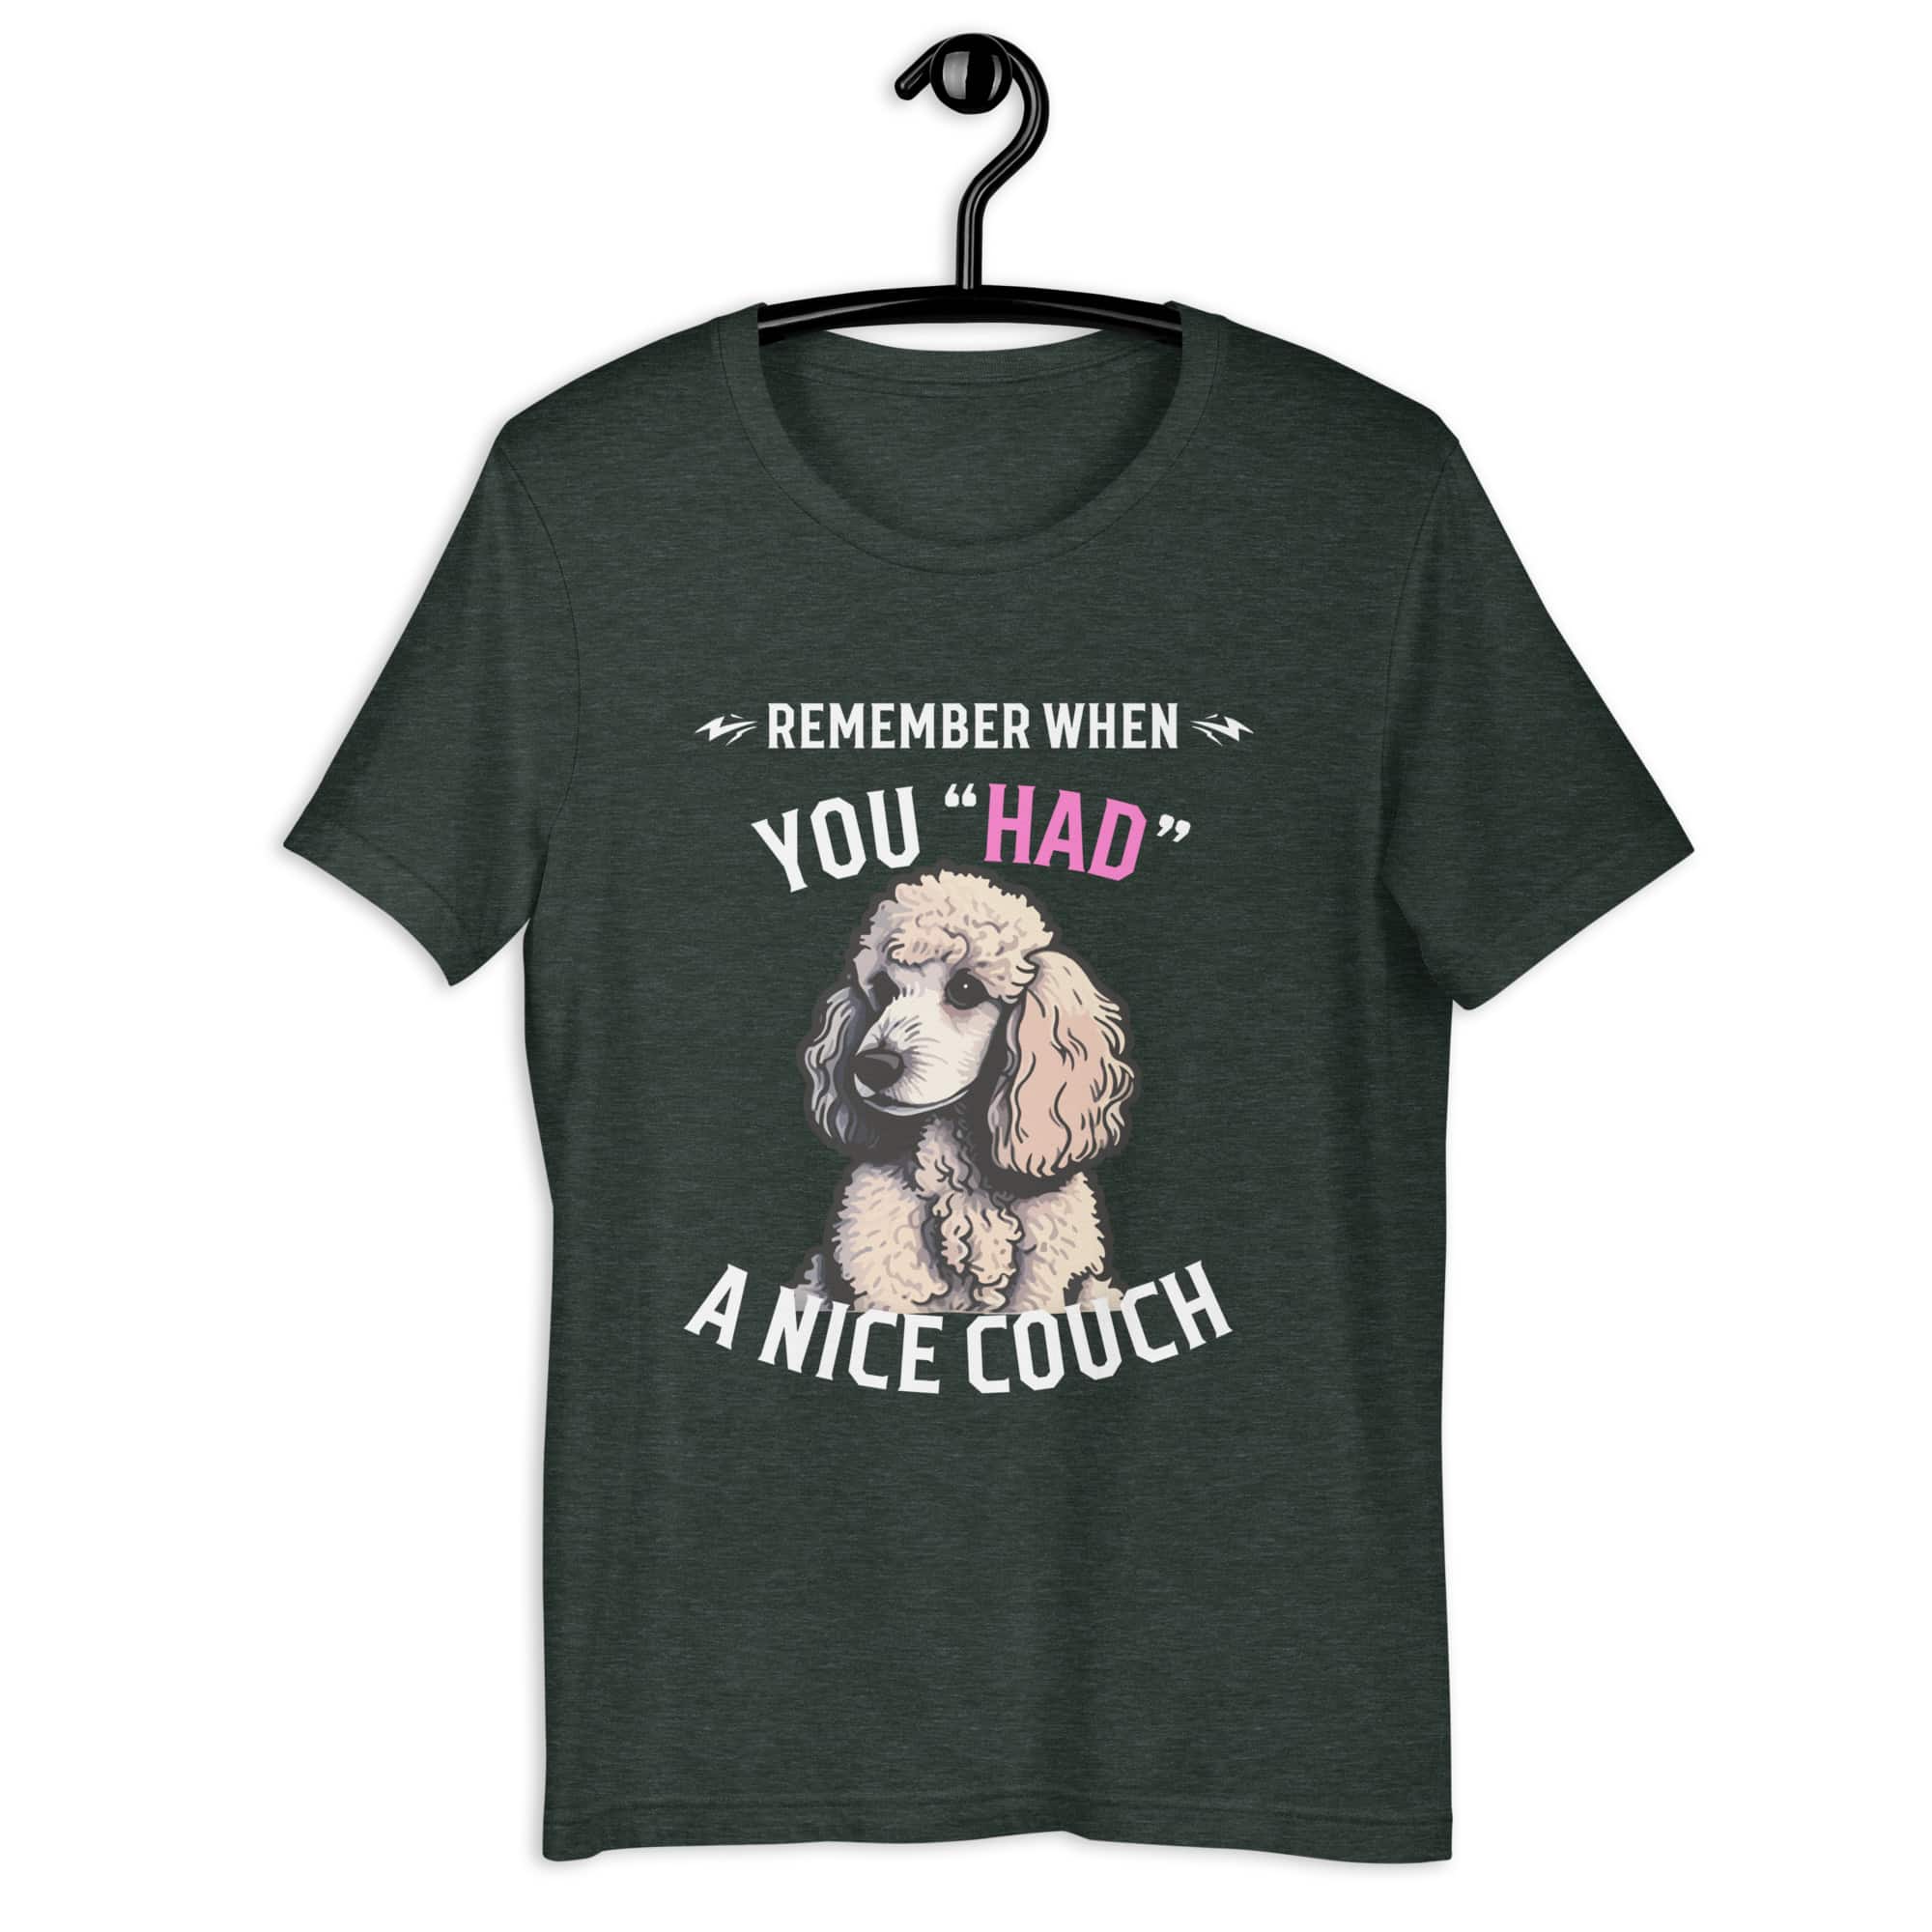 "Remember When You Had A Nice Couch" Funny Poodle Unisex T-Shirt matte black